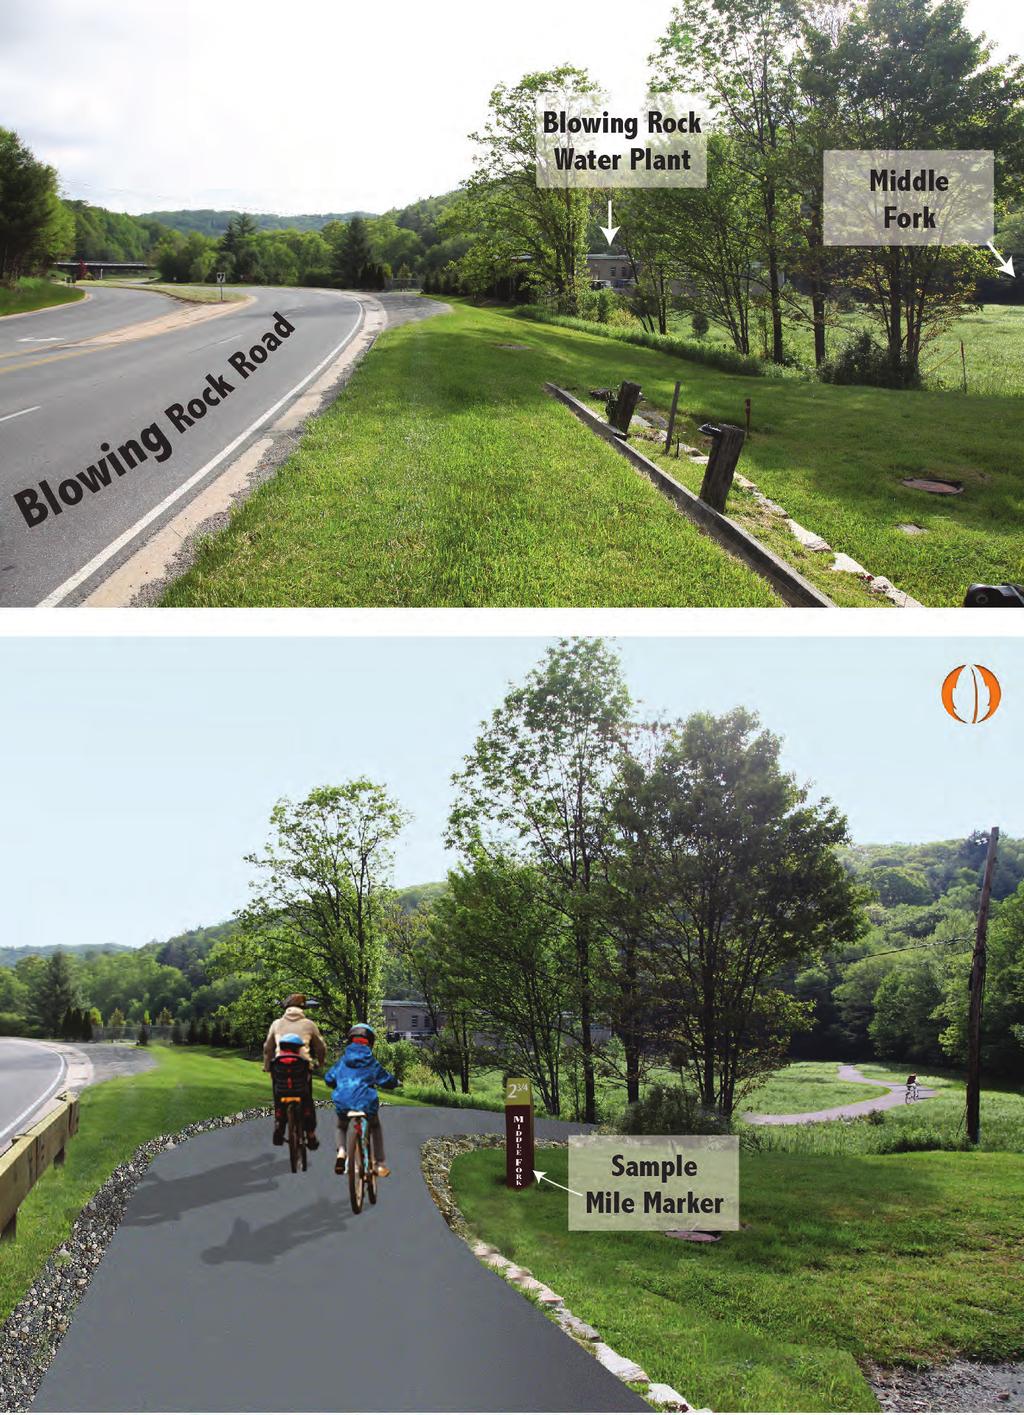 Existing Proposed Once the proposed trail reaches The Blowing Rock Water Plant, the route